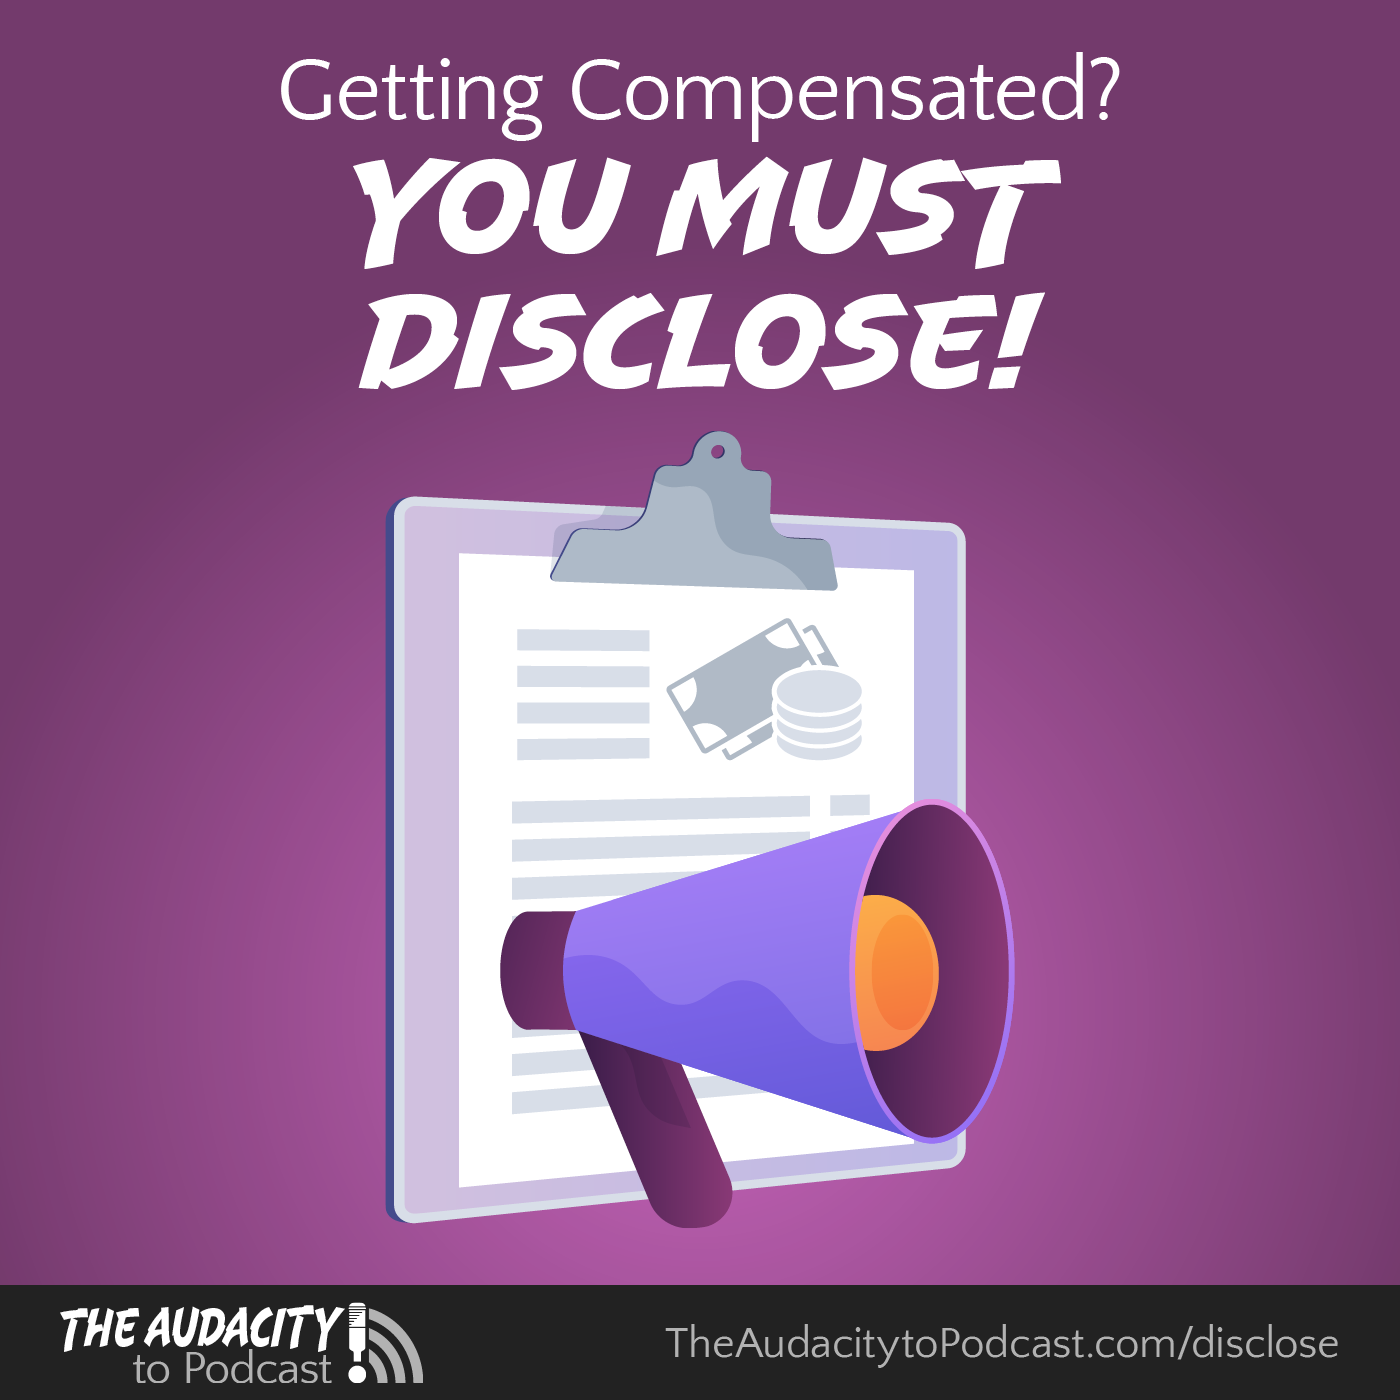 You MUST Disclose Whenever You’re Compensated!